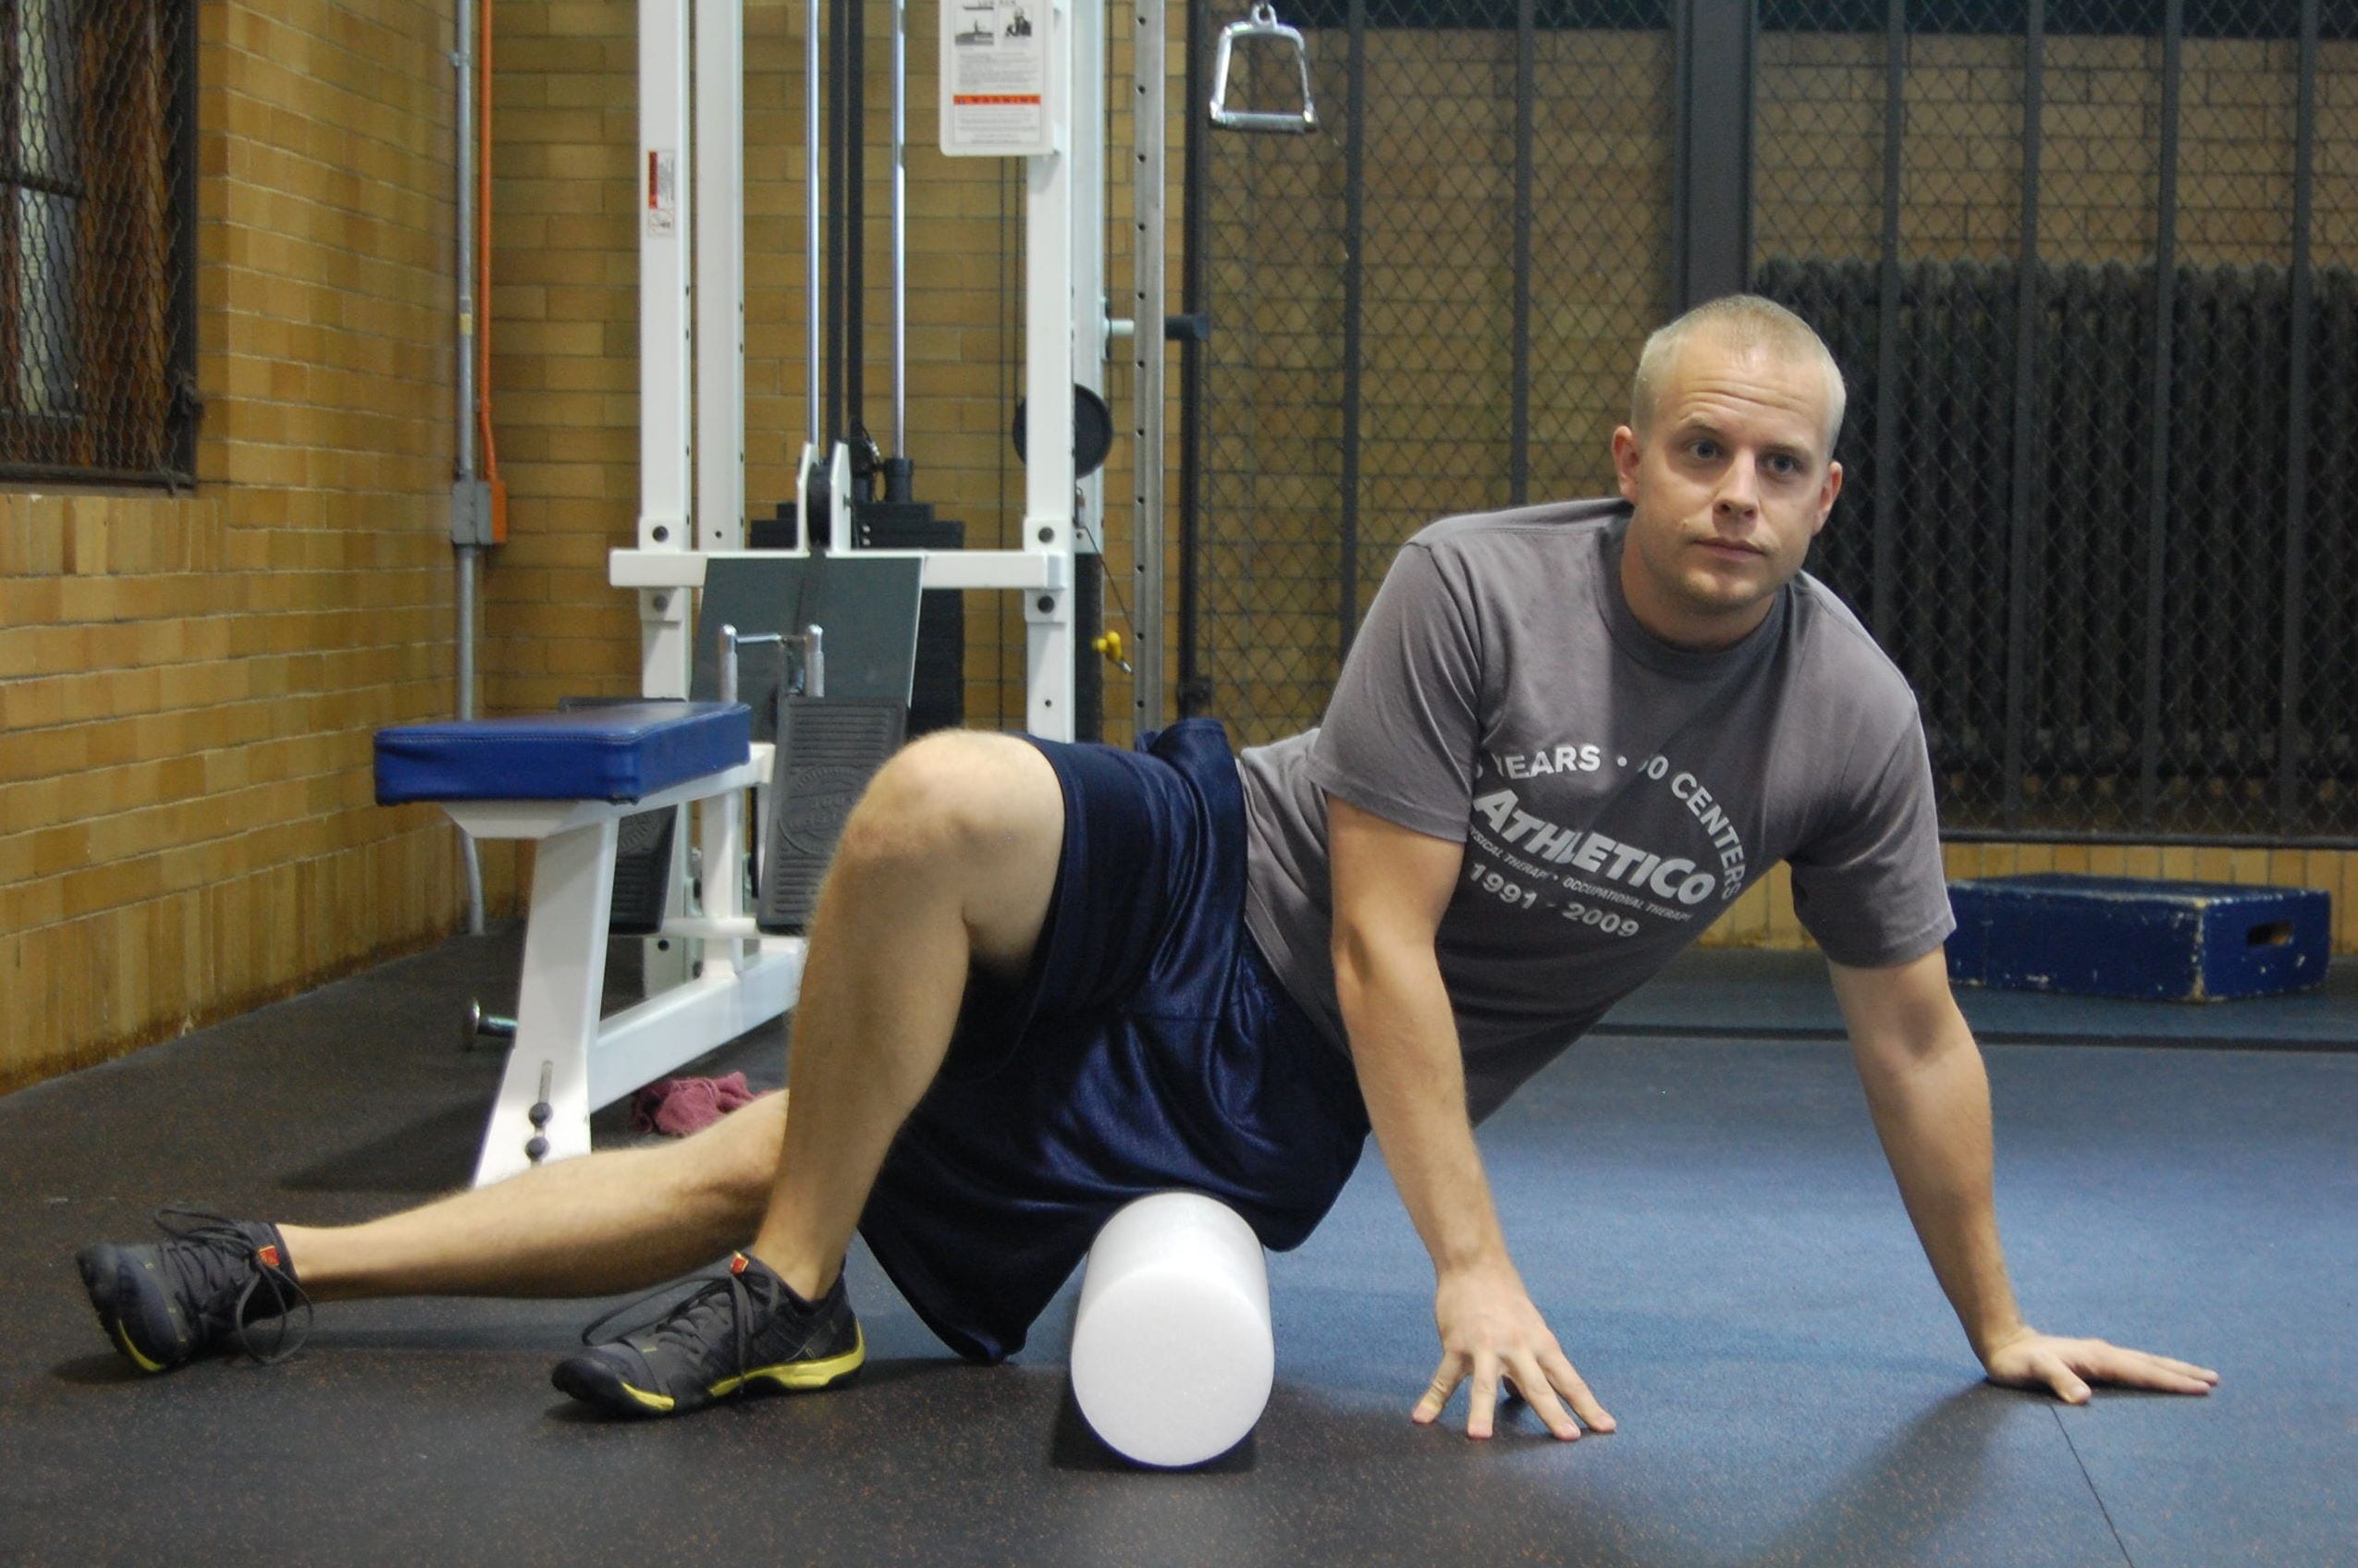 Foam rolling is one of the easiest ways to help your body recover